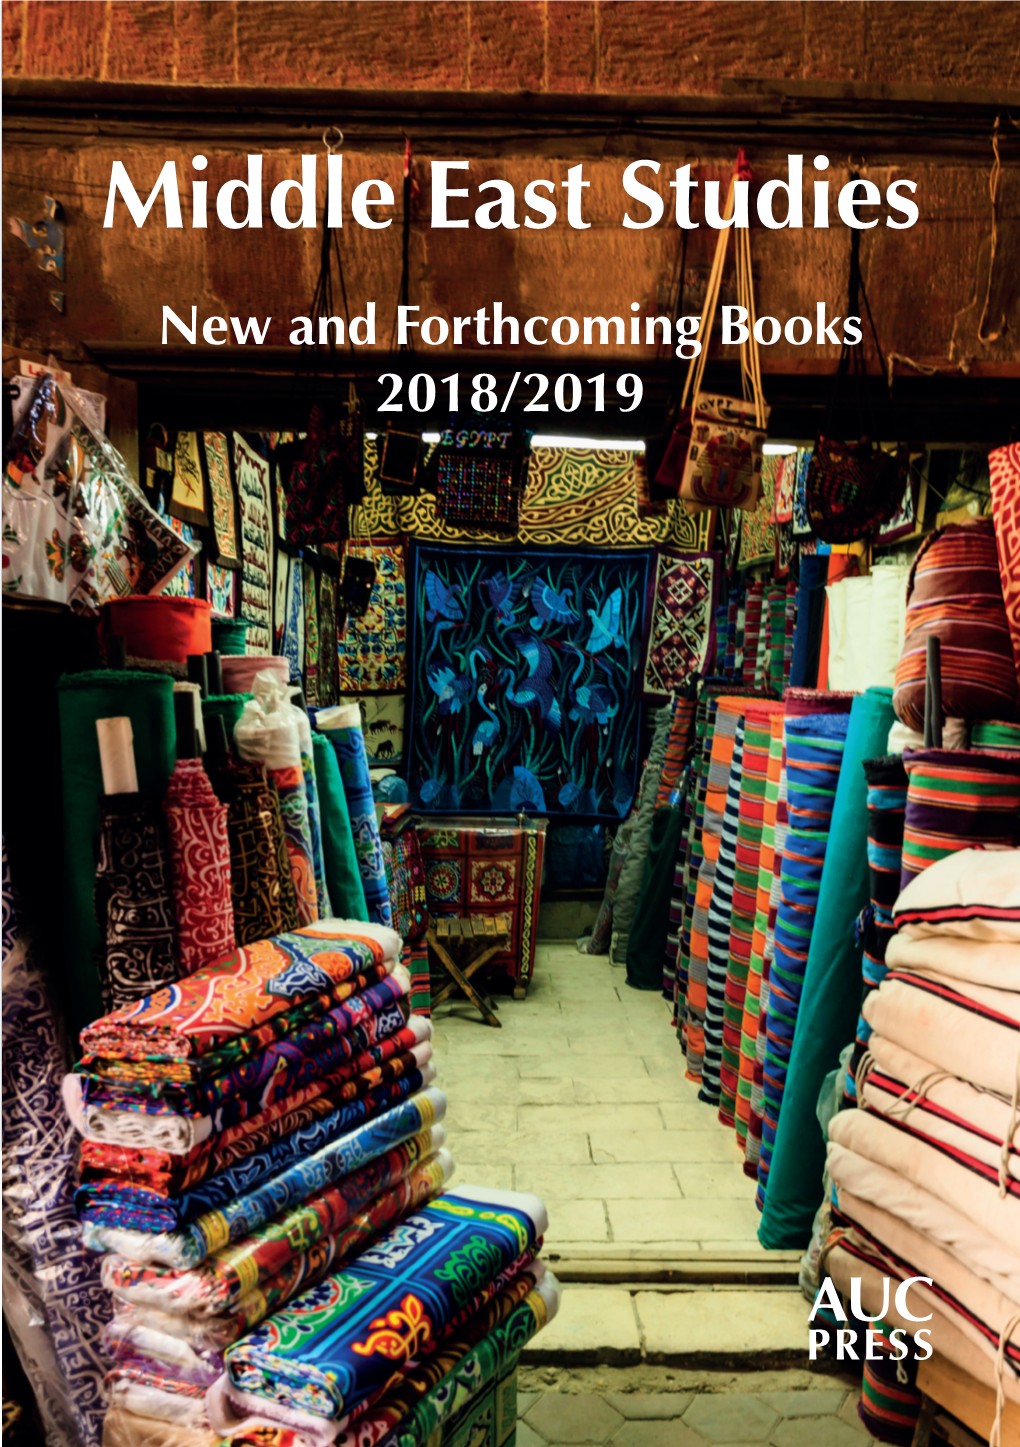 Middle East Studies New and Forthcoming Books 2018/2019